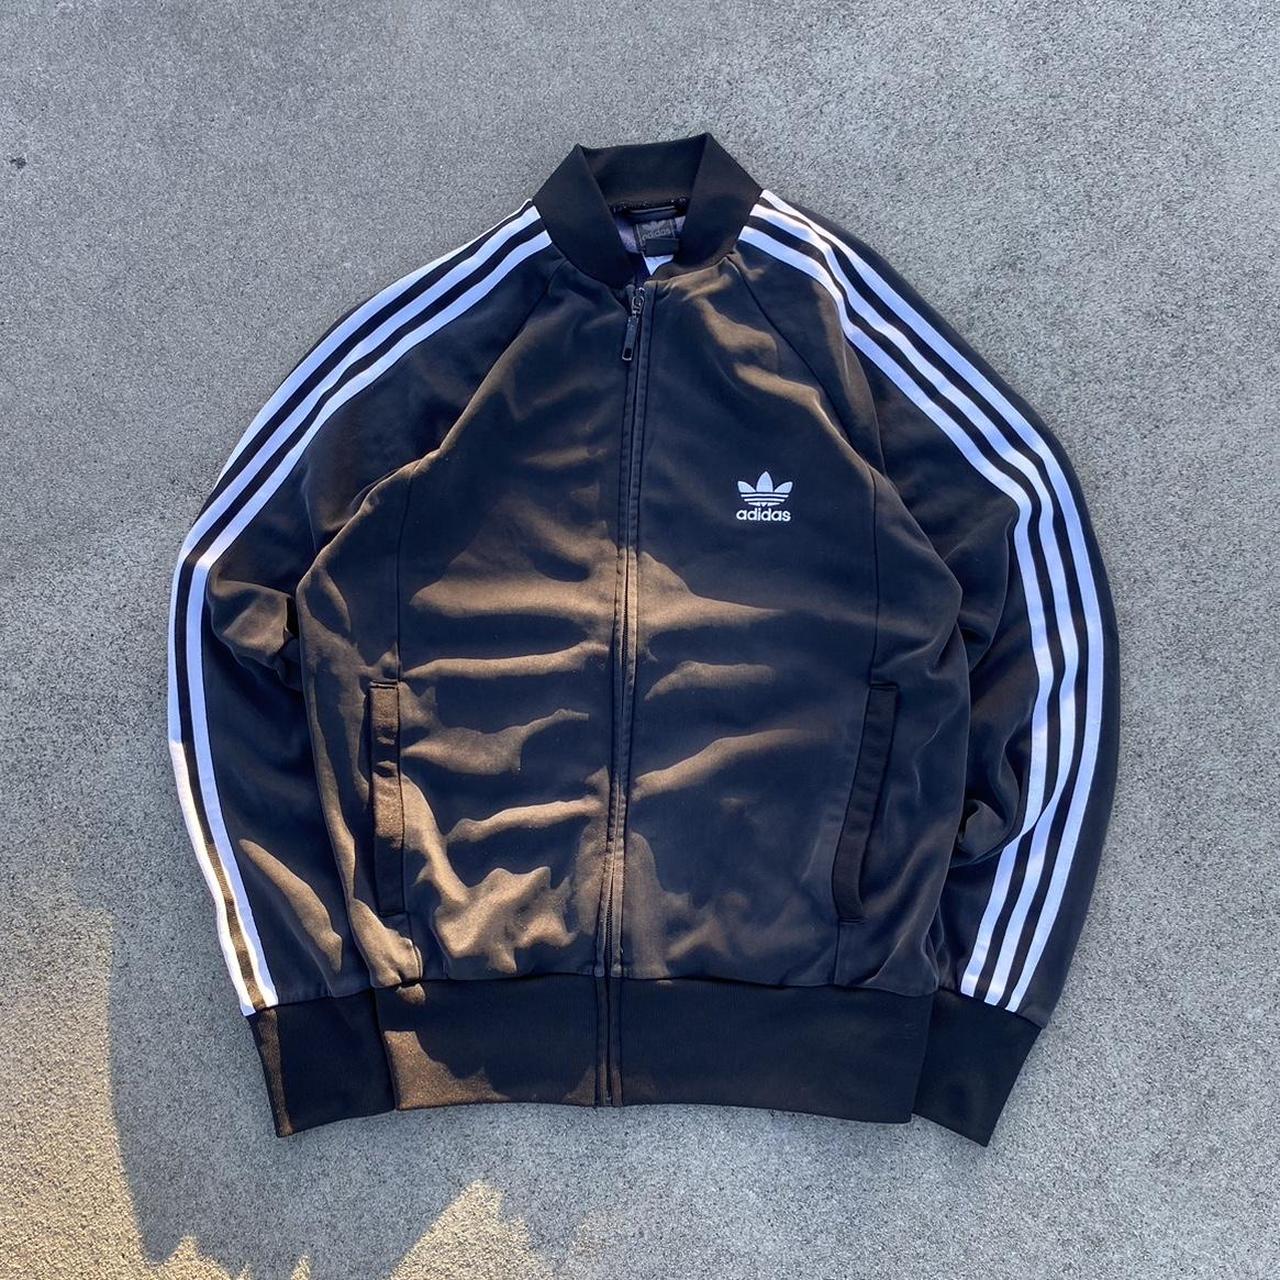 Vintage Adidas Zipper Recommended size:... - Depop